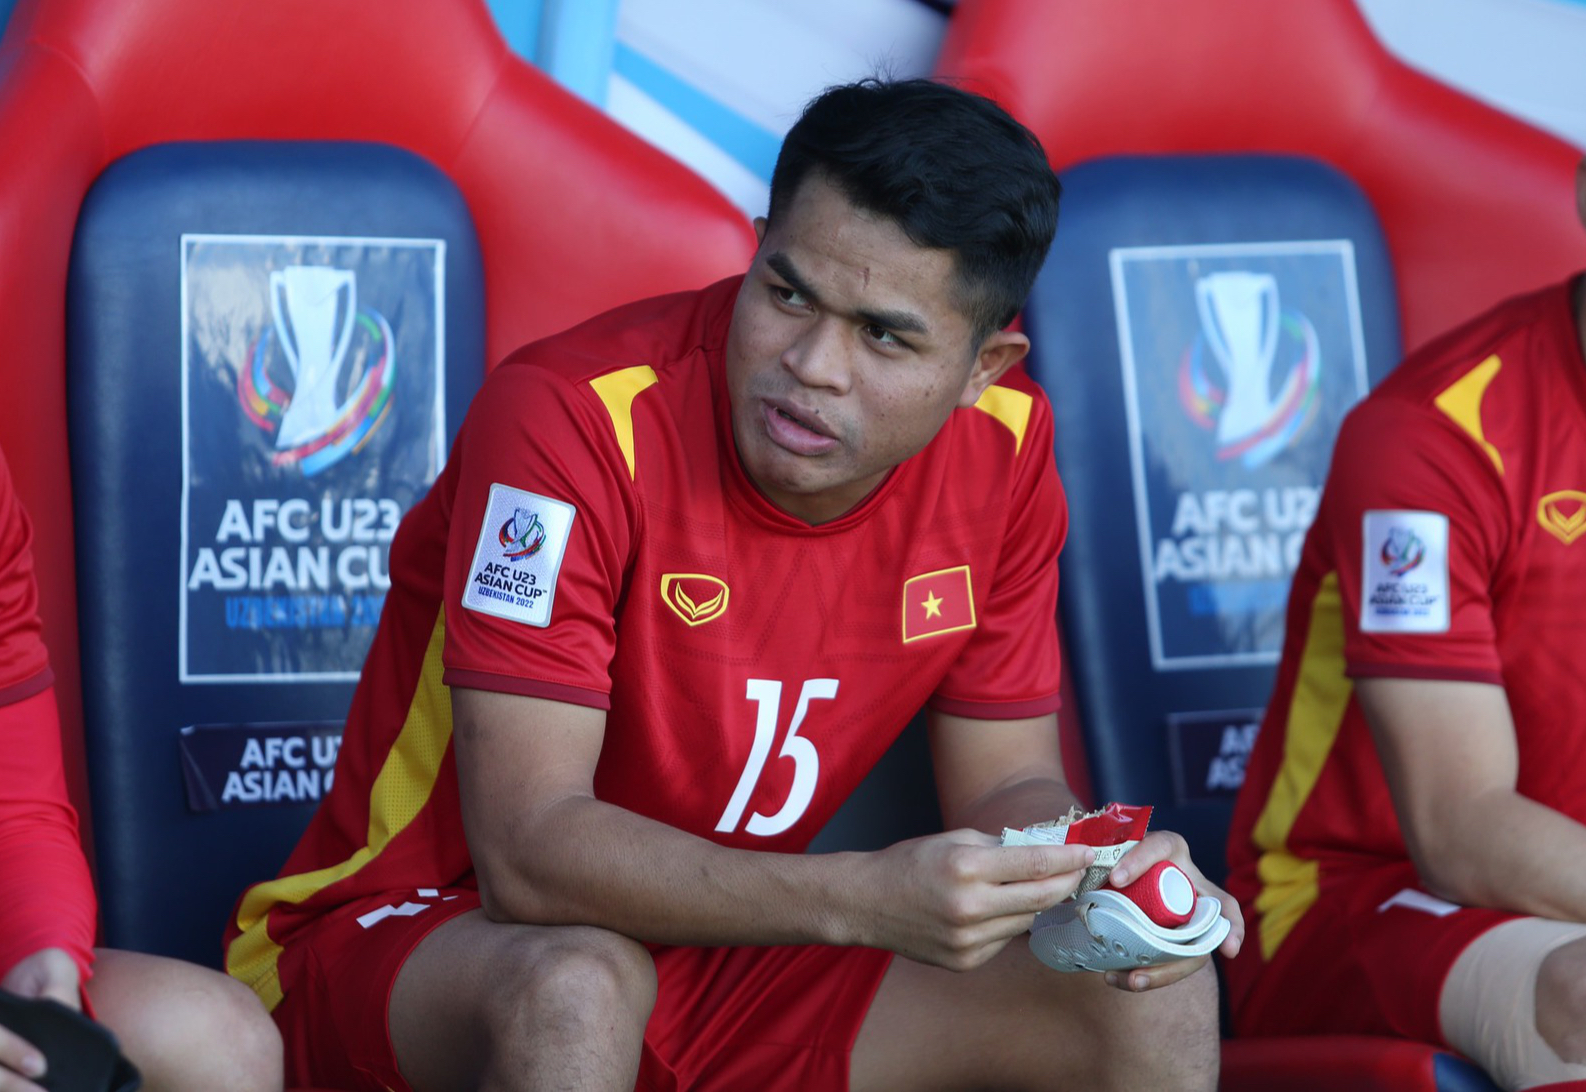 Van Toan sat contemplatively looking at his teammates, Dung Quang Nho recharged before U23 Vietnam played - Photo 5.